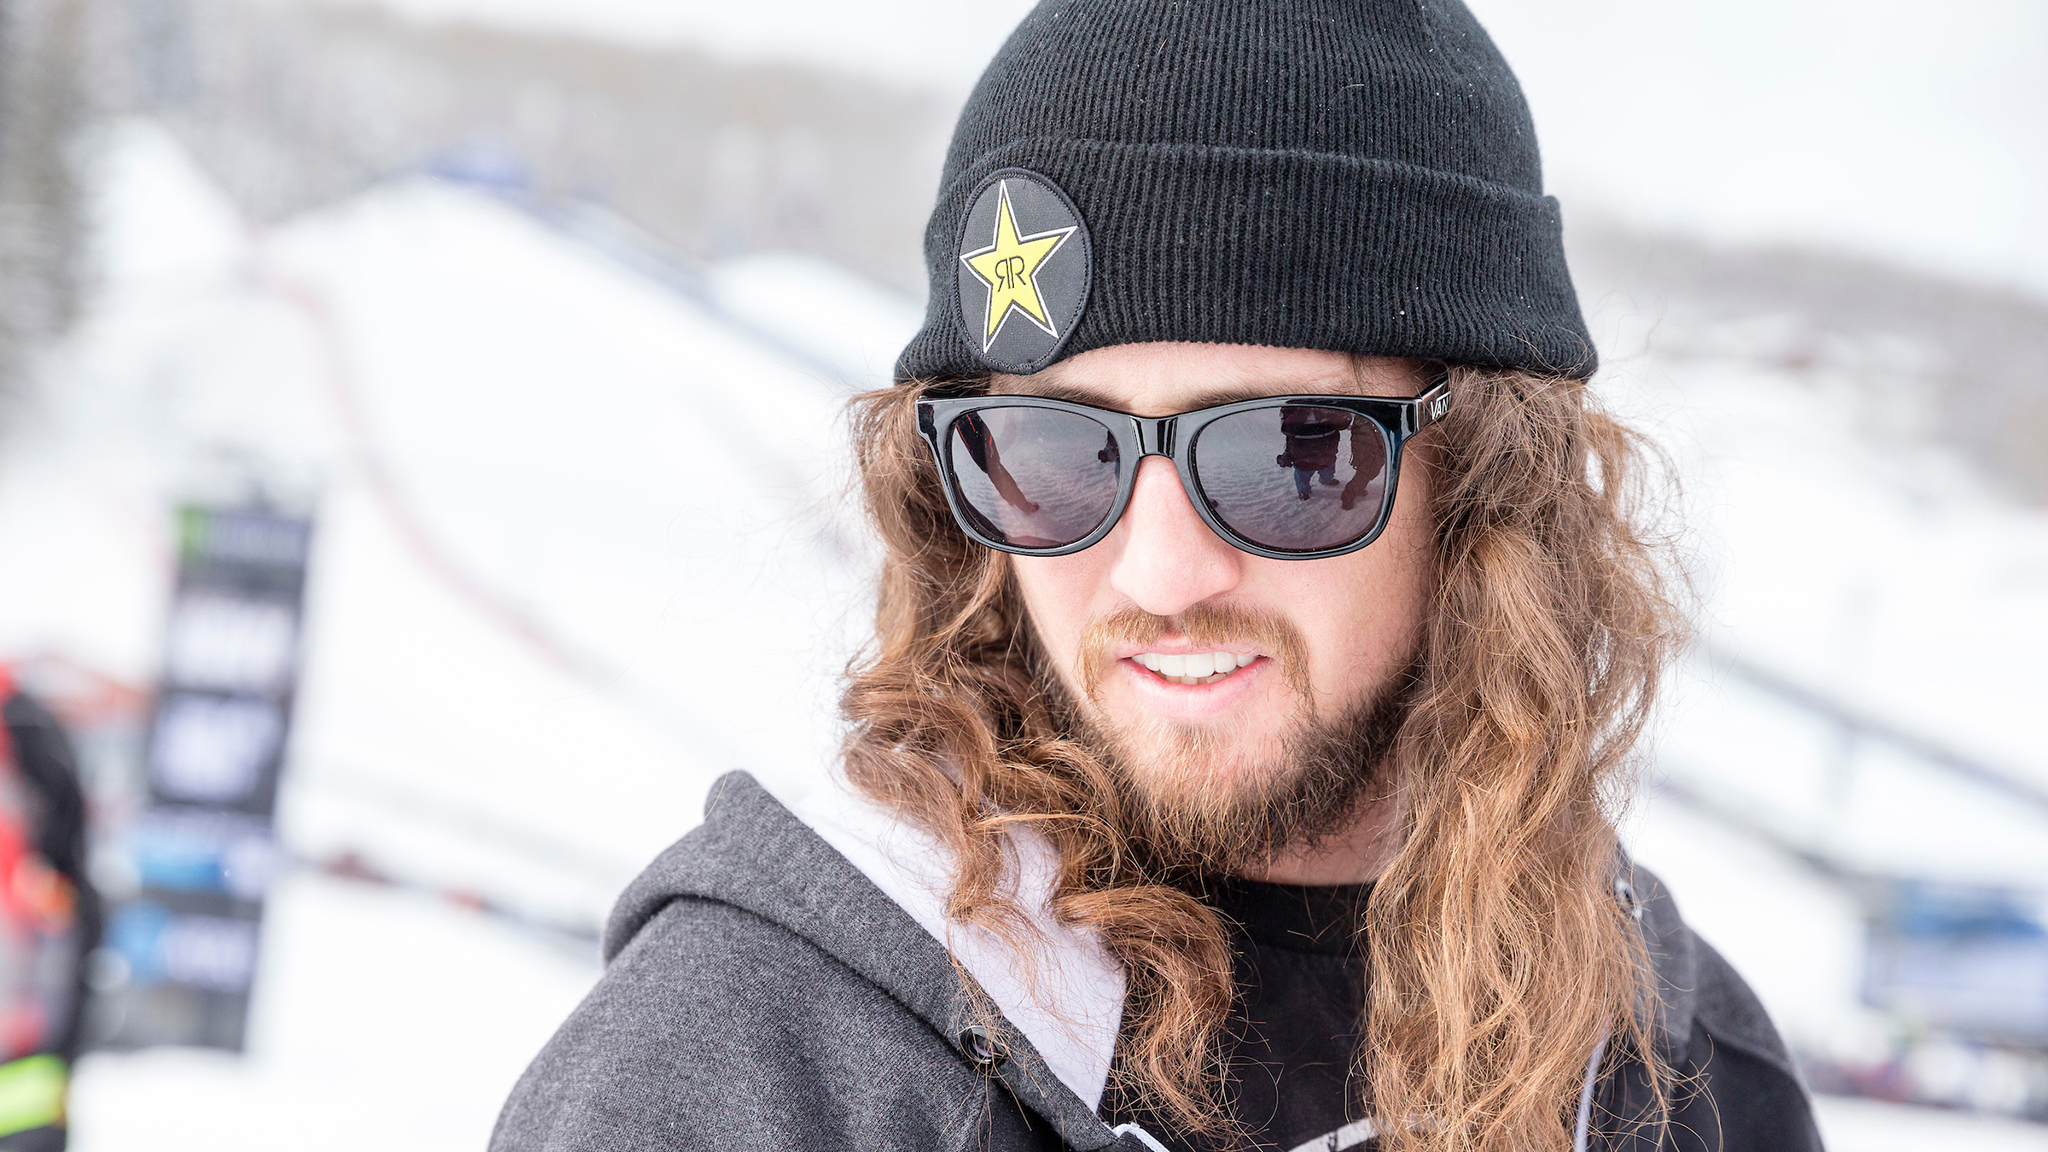 It's positive and it's looking up, said Colten Moore following his fall at X Games Aspen 2017. I'm in high spirits.